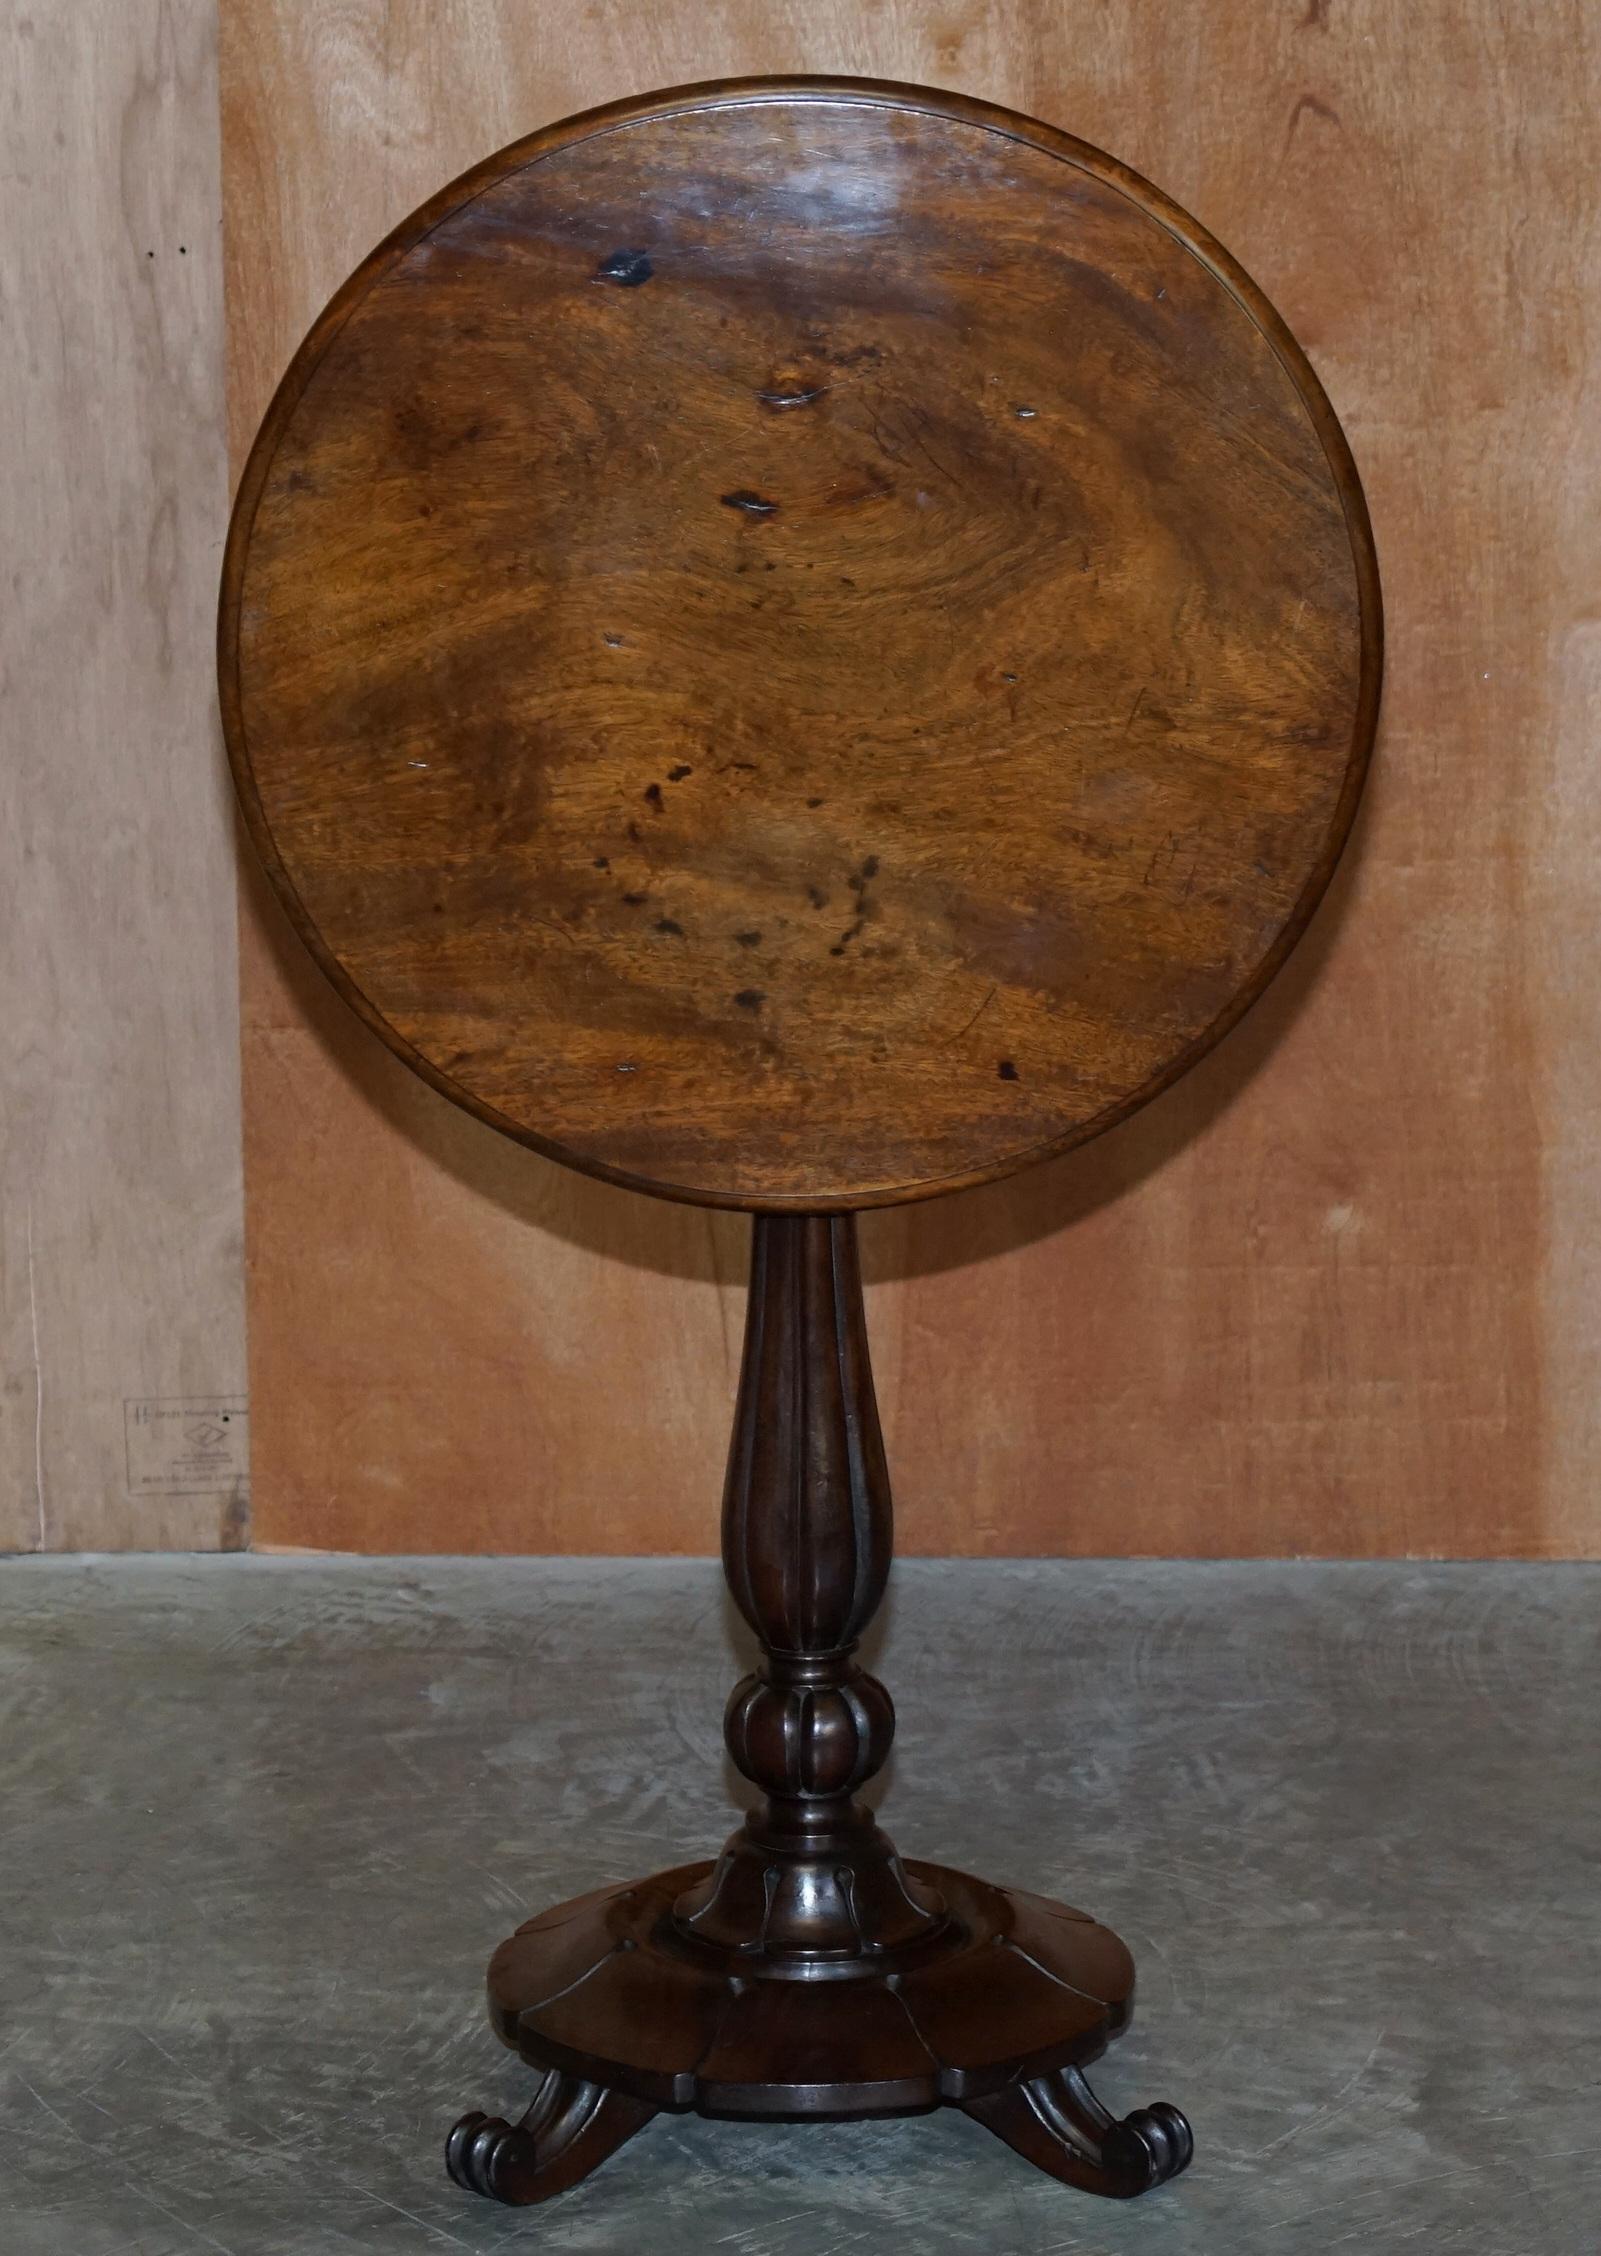 We are delighted to offer for sale this lovely circa 1830 William IV Mahogany tilt top table with fluted column base

A wonderfully decorative and super original William IV occasional table. This piece is pure art furniture and is 100% original.